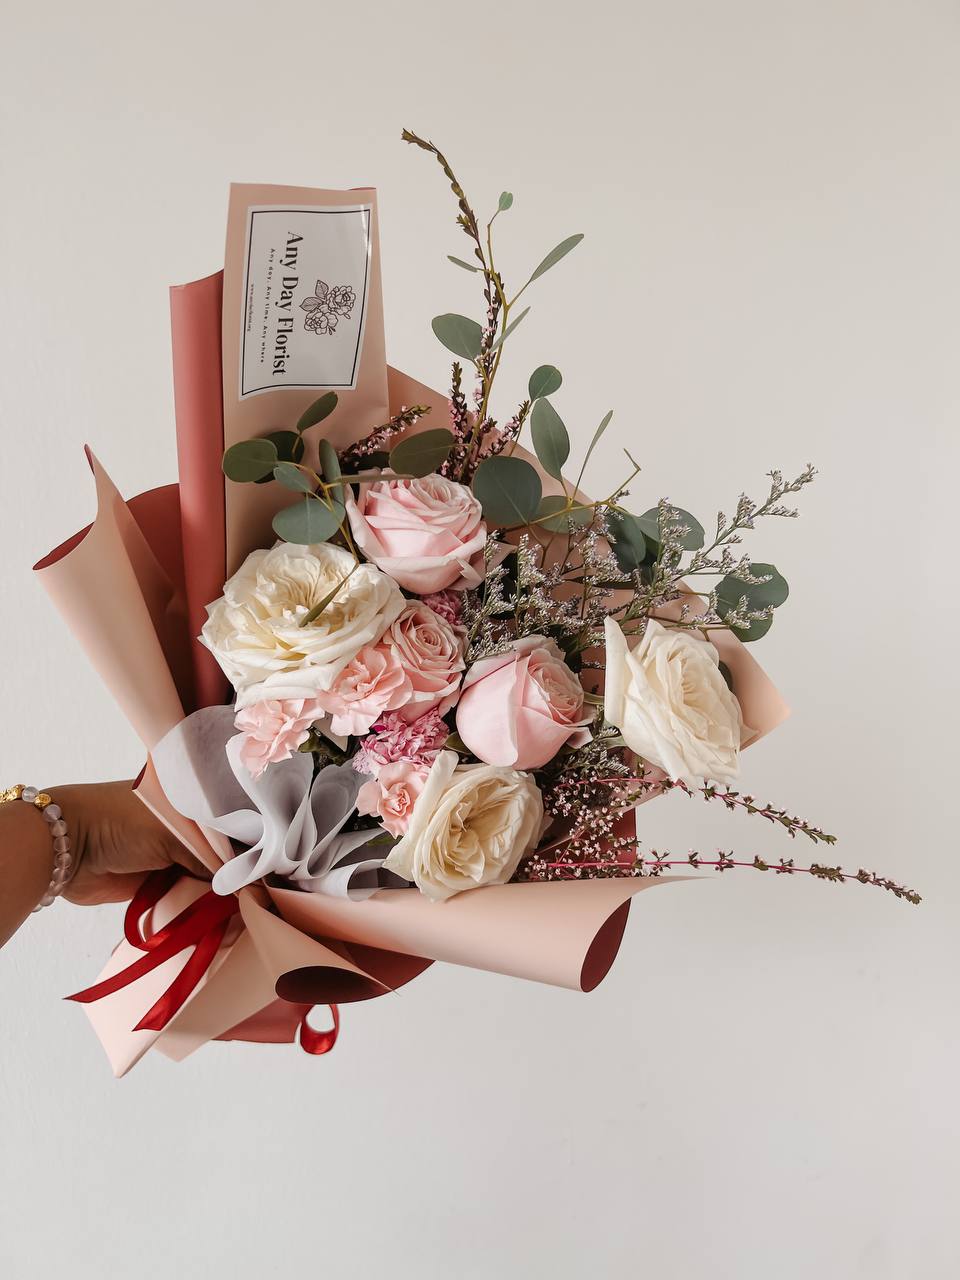 Any Day FloristPerfect Ocassion for: Birthday, Monthsary , Anniversary, I'm Sorry, Valentine's Day
*Do note that fresh flowers, fillers &amp; foliage are seasonal and are subjectedPink Luster Bouquet | Hand Bouquet of the Week